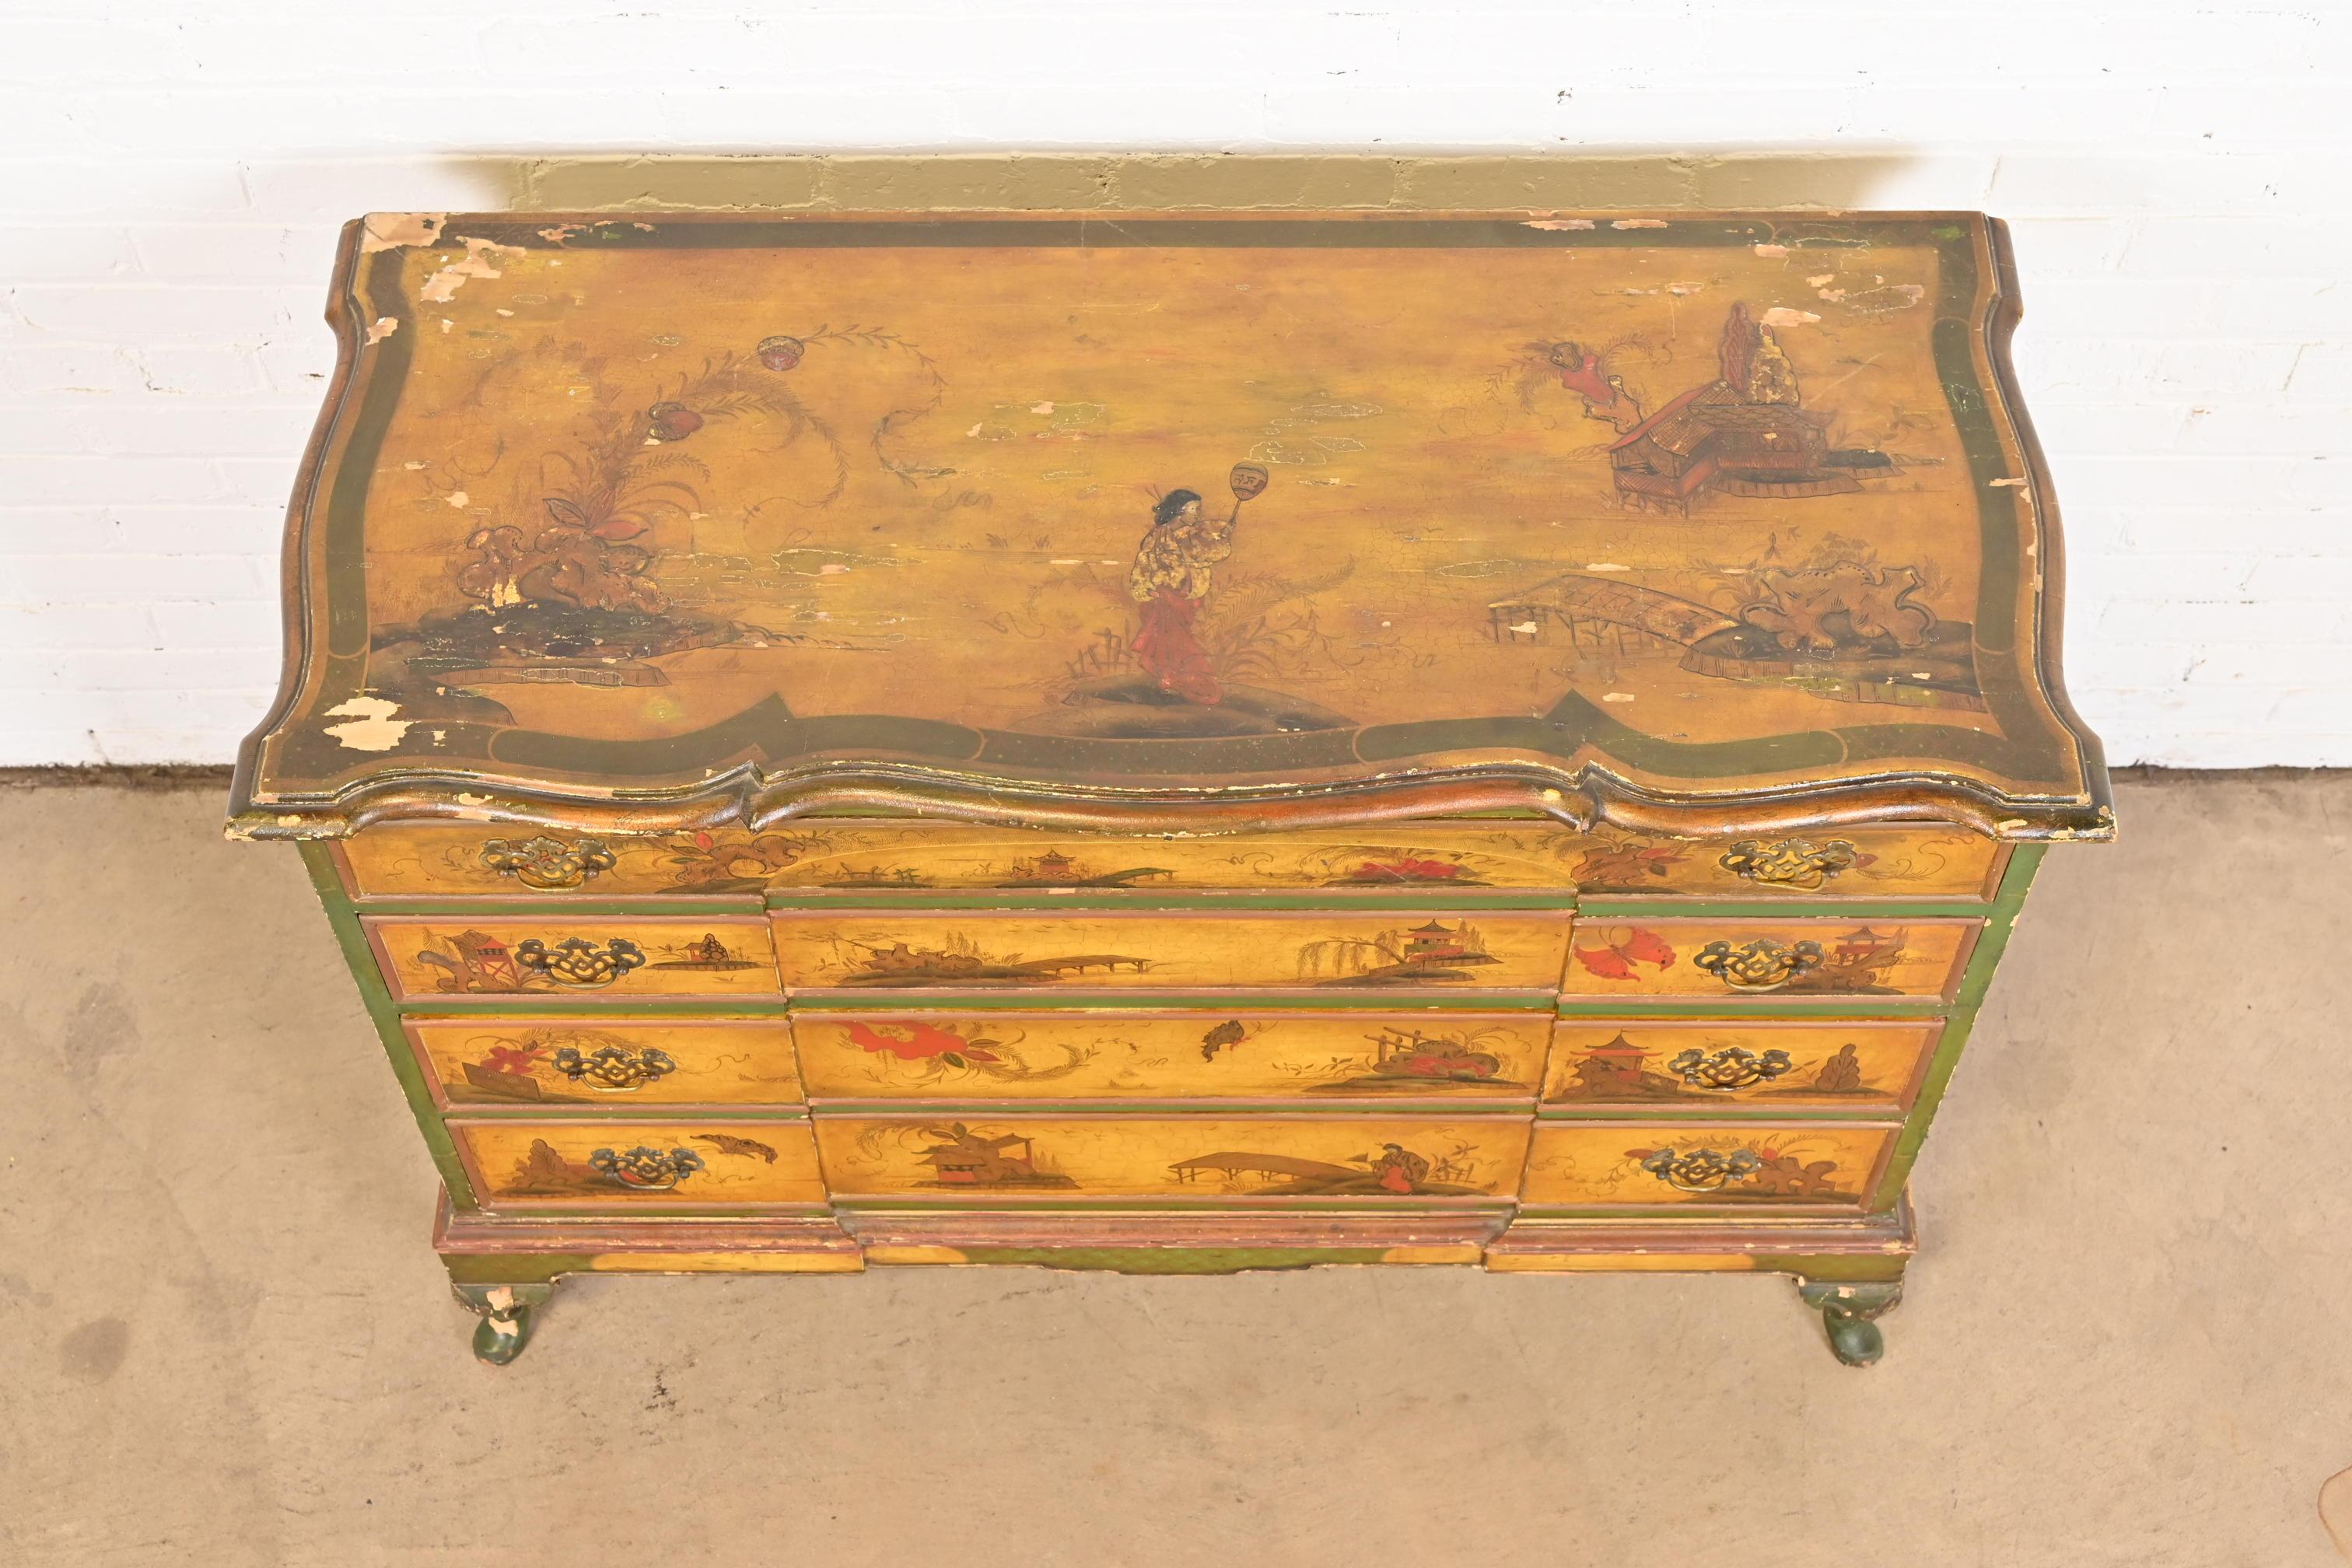 Antique Japanned Chinoiserie Queen Anne Bureau From Historic Edgecroft Mansion For Sale 3